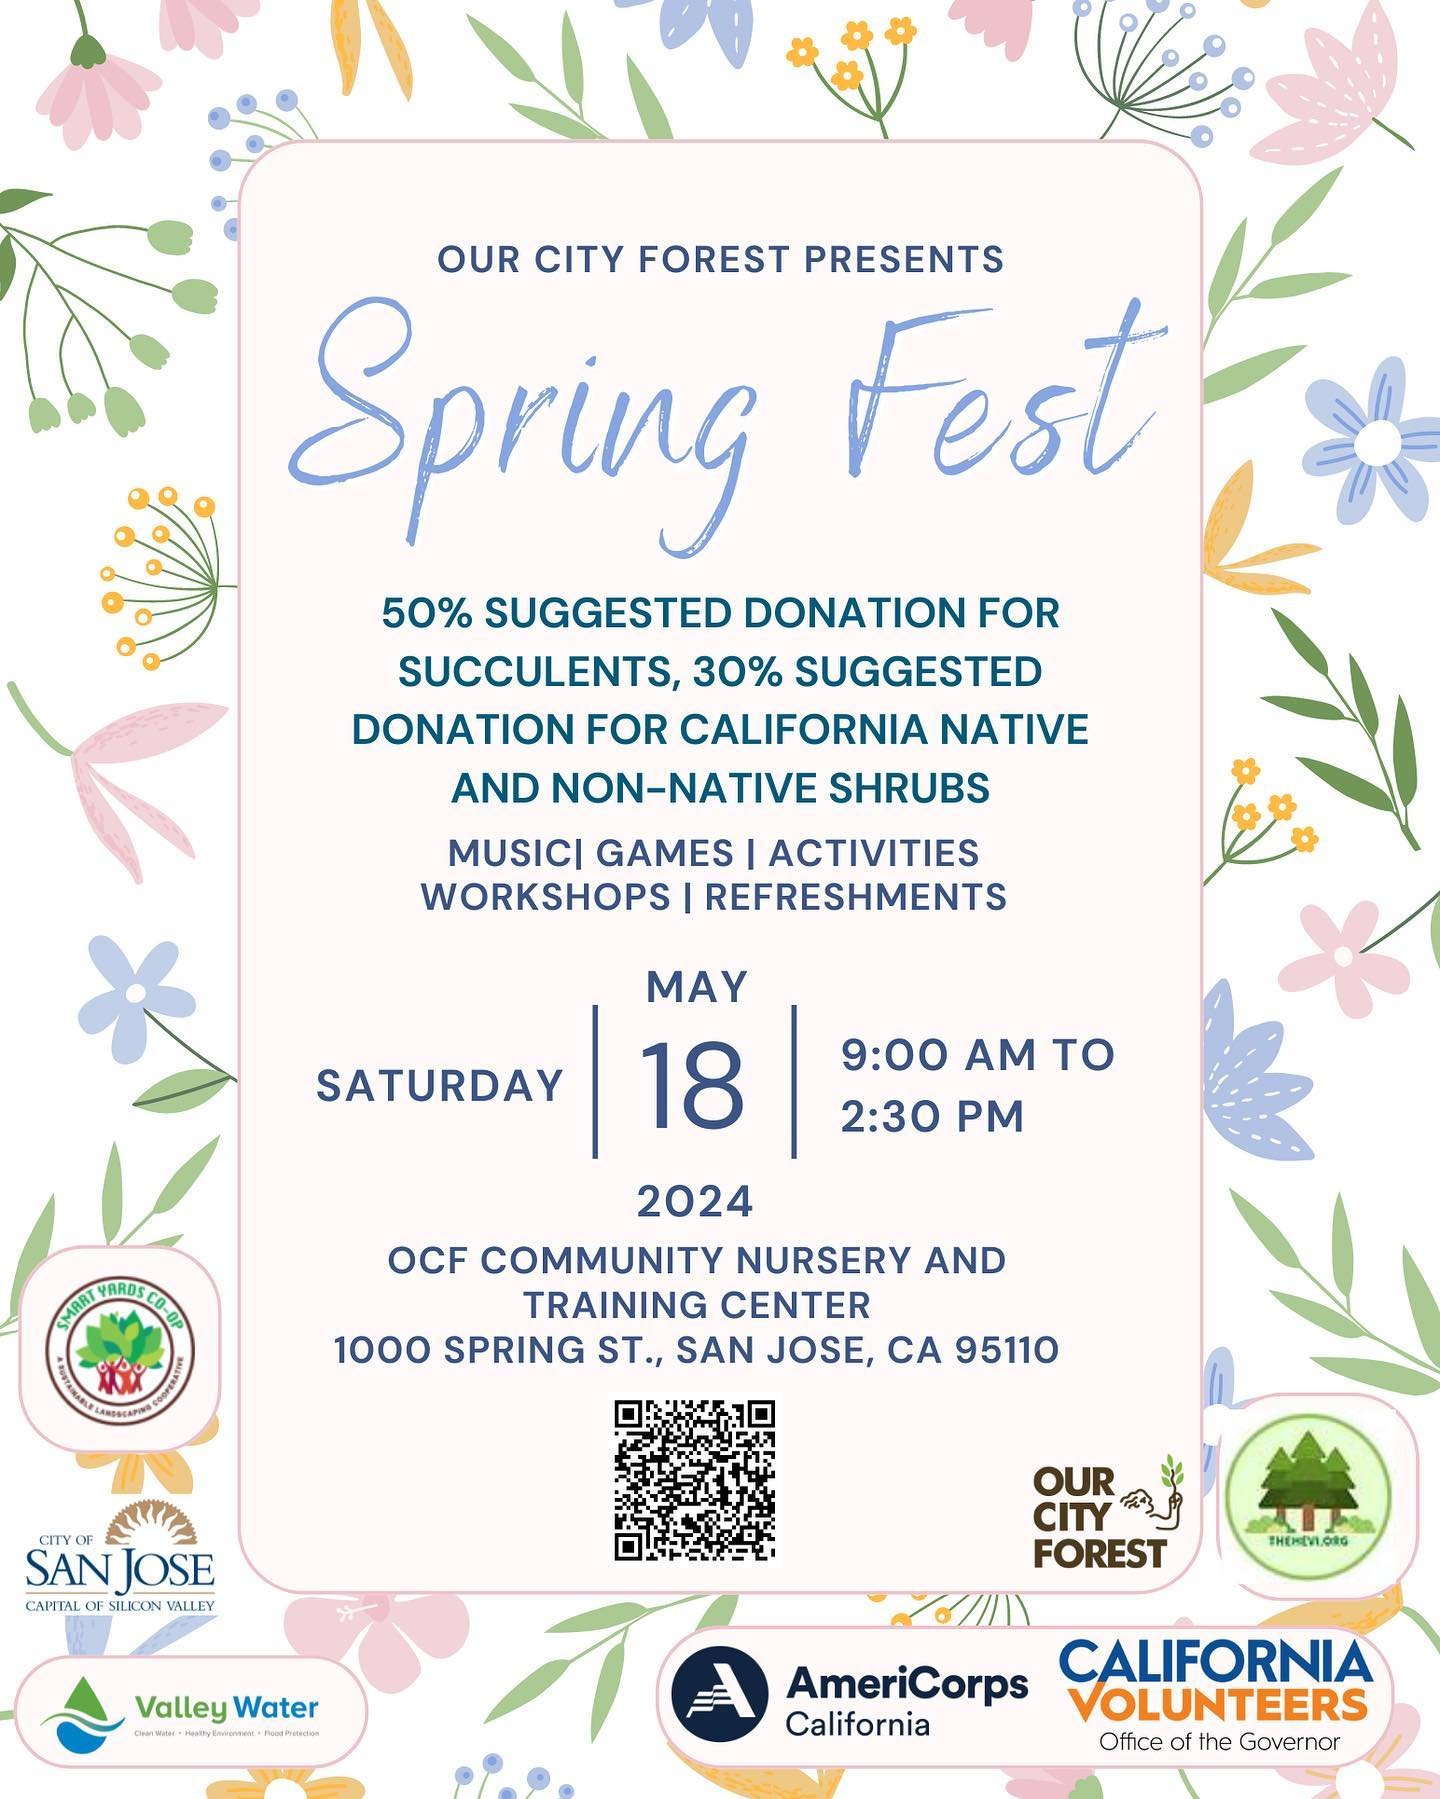 🌸Free event full of music, activities, workshops, and a major plant sale. 
💐Spring Fest is on Saturday, May 18, from 9am - 2:30pm! Save the date and sign up via our Eventbrite link below and in our bio.

https://www.eventbrite.com/e/spring-fest-at-